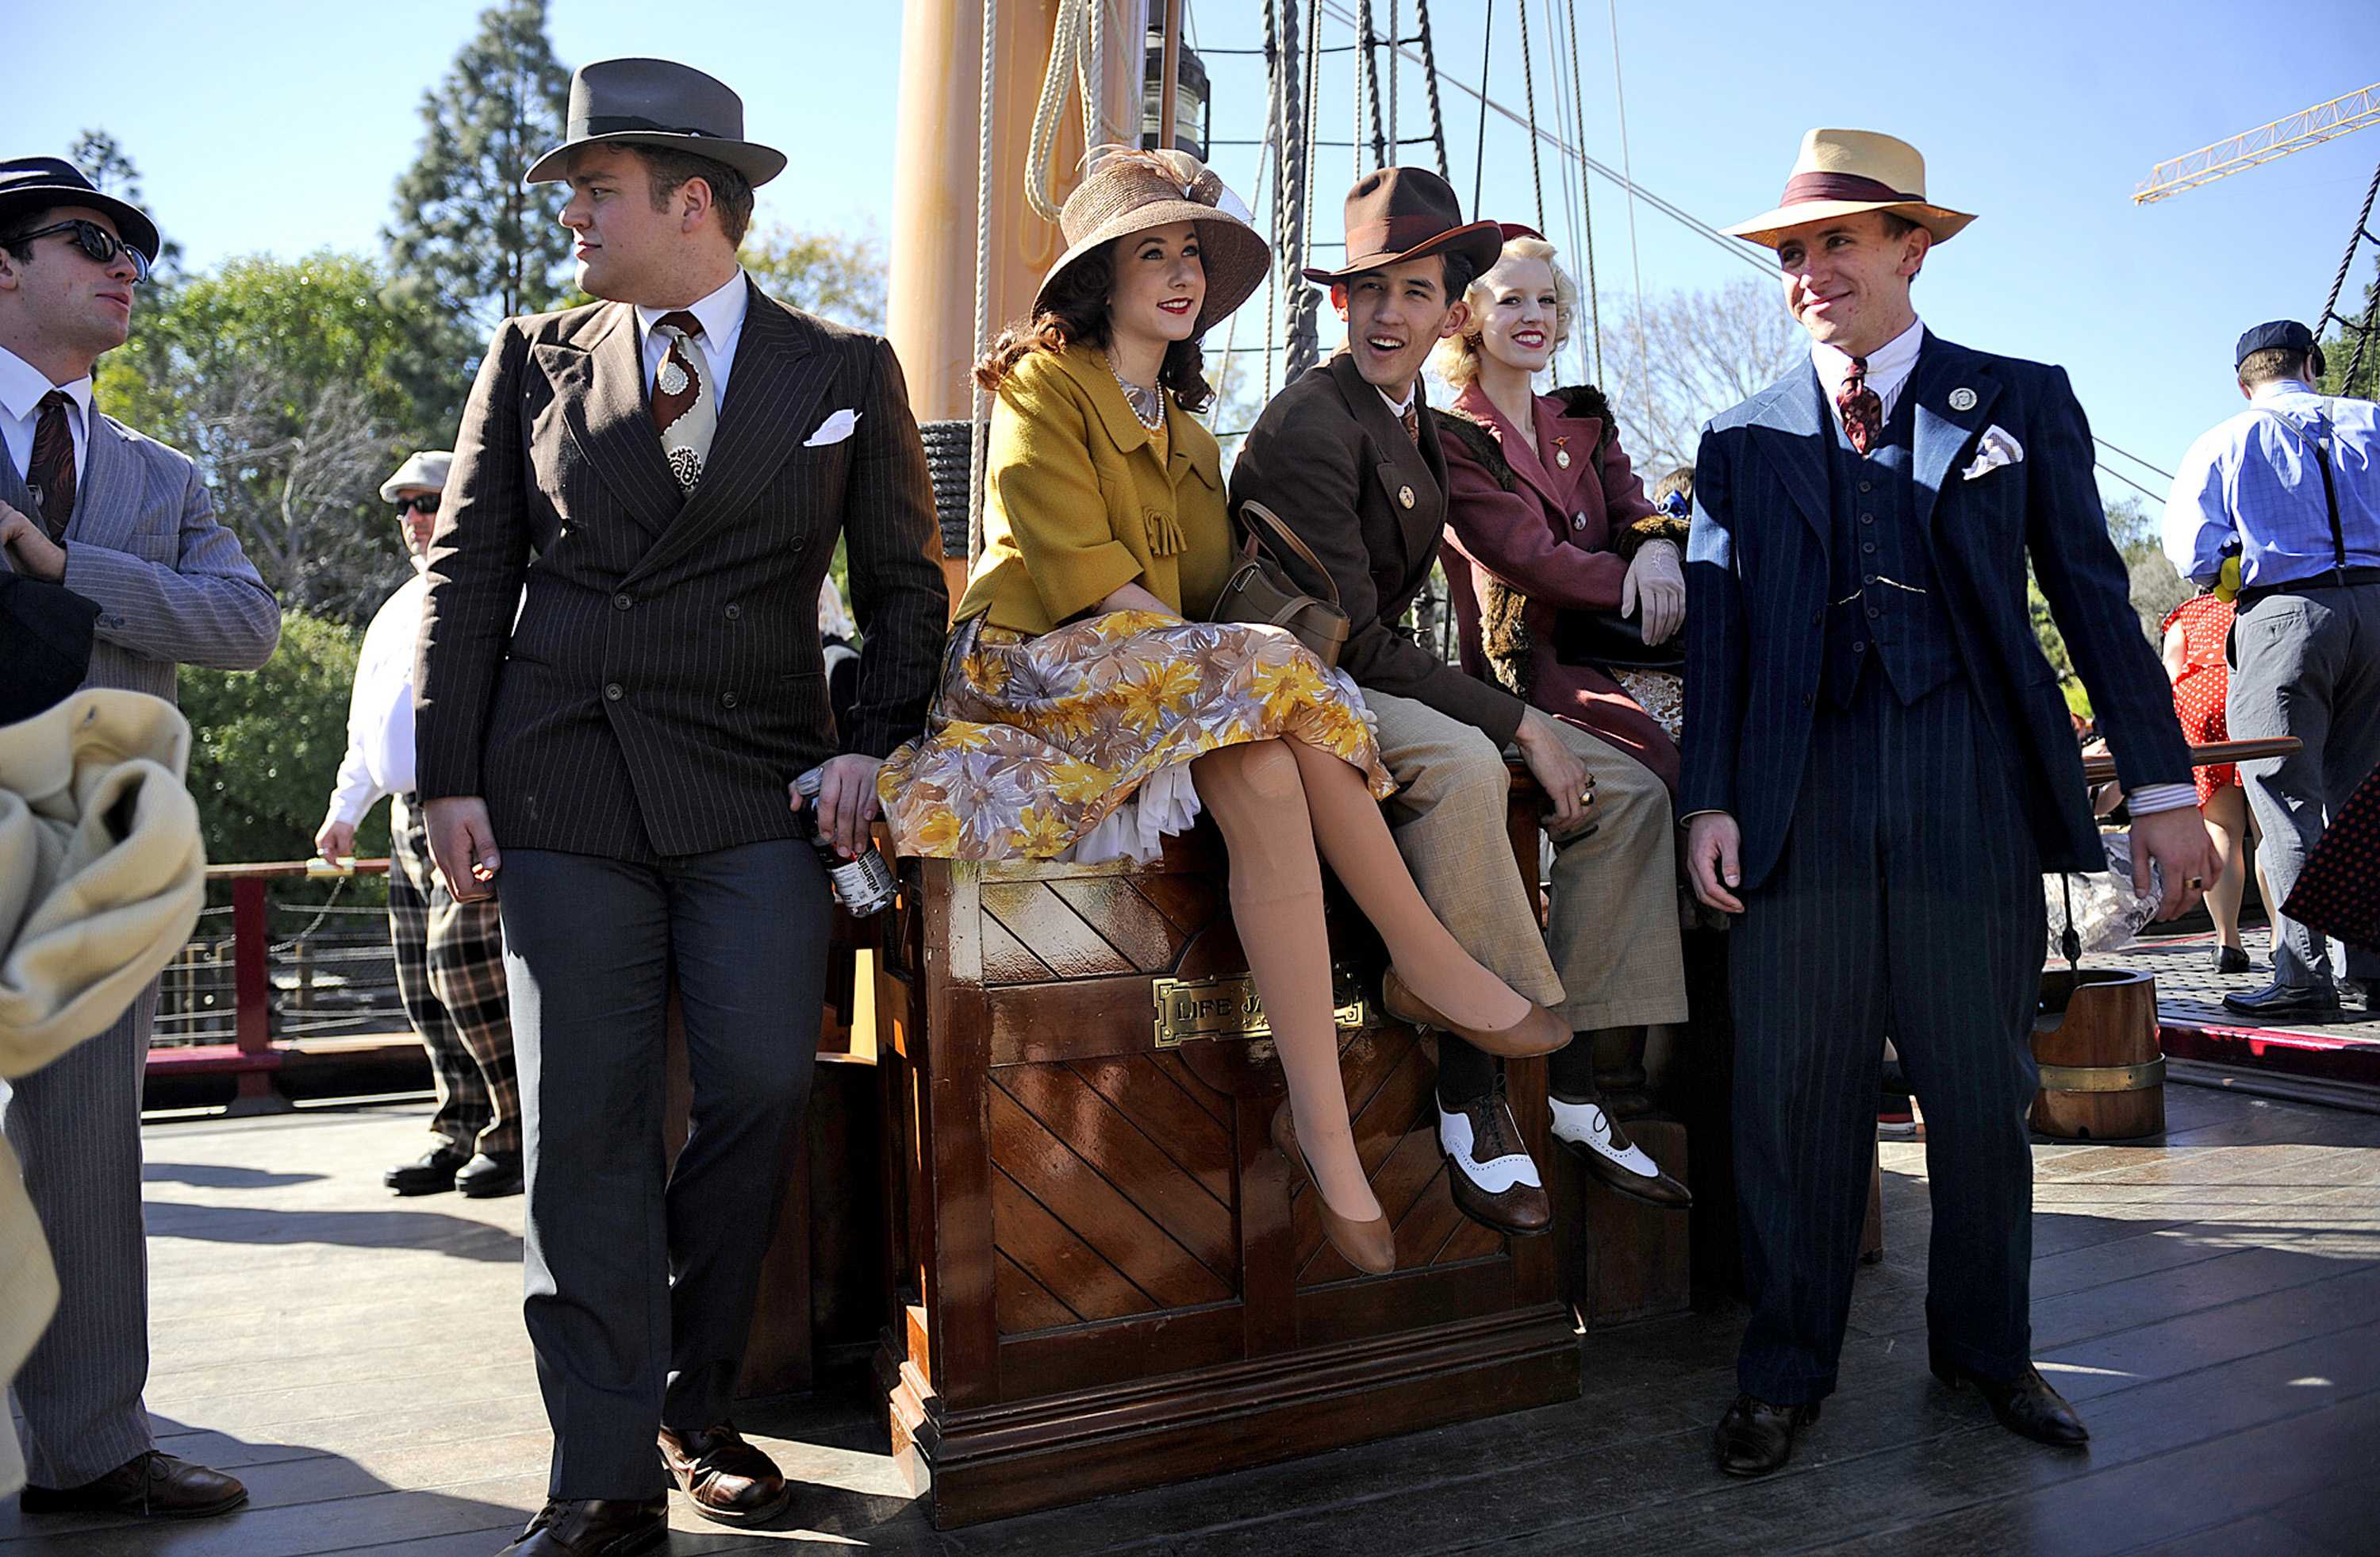 Participants enjoy Dapper Day at Disneyland in Anaheim, California, on February 24, 2013. The semi-annual event brings together those wanting to celebrate the tradition of stepping out in style. (Christina House/Los Angeles Times/MCT)